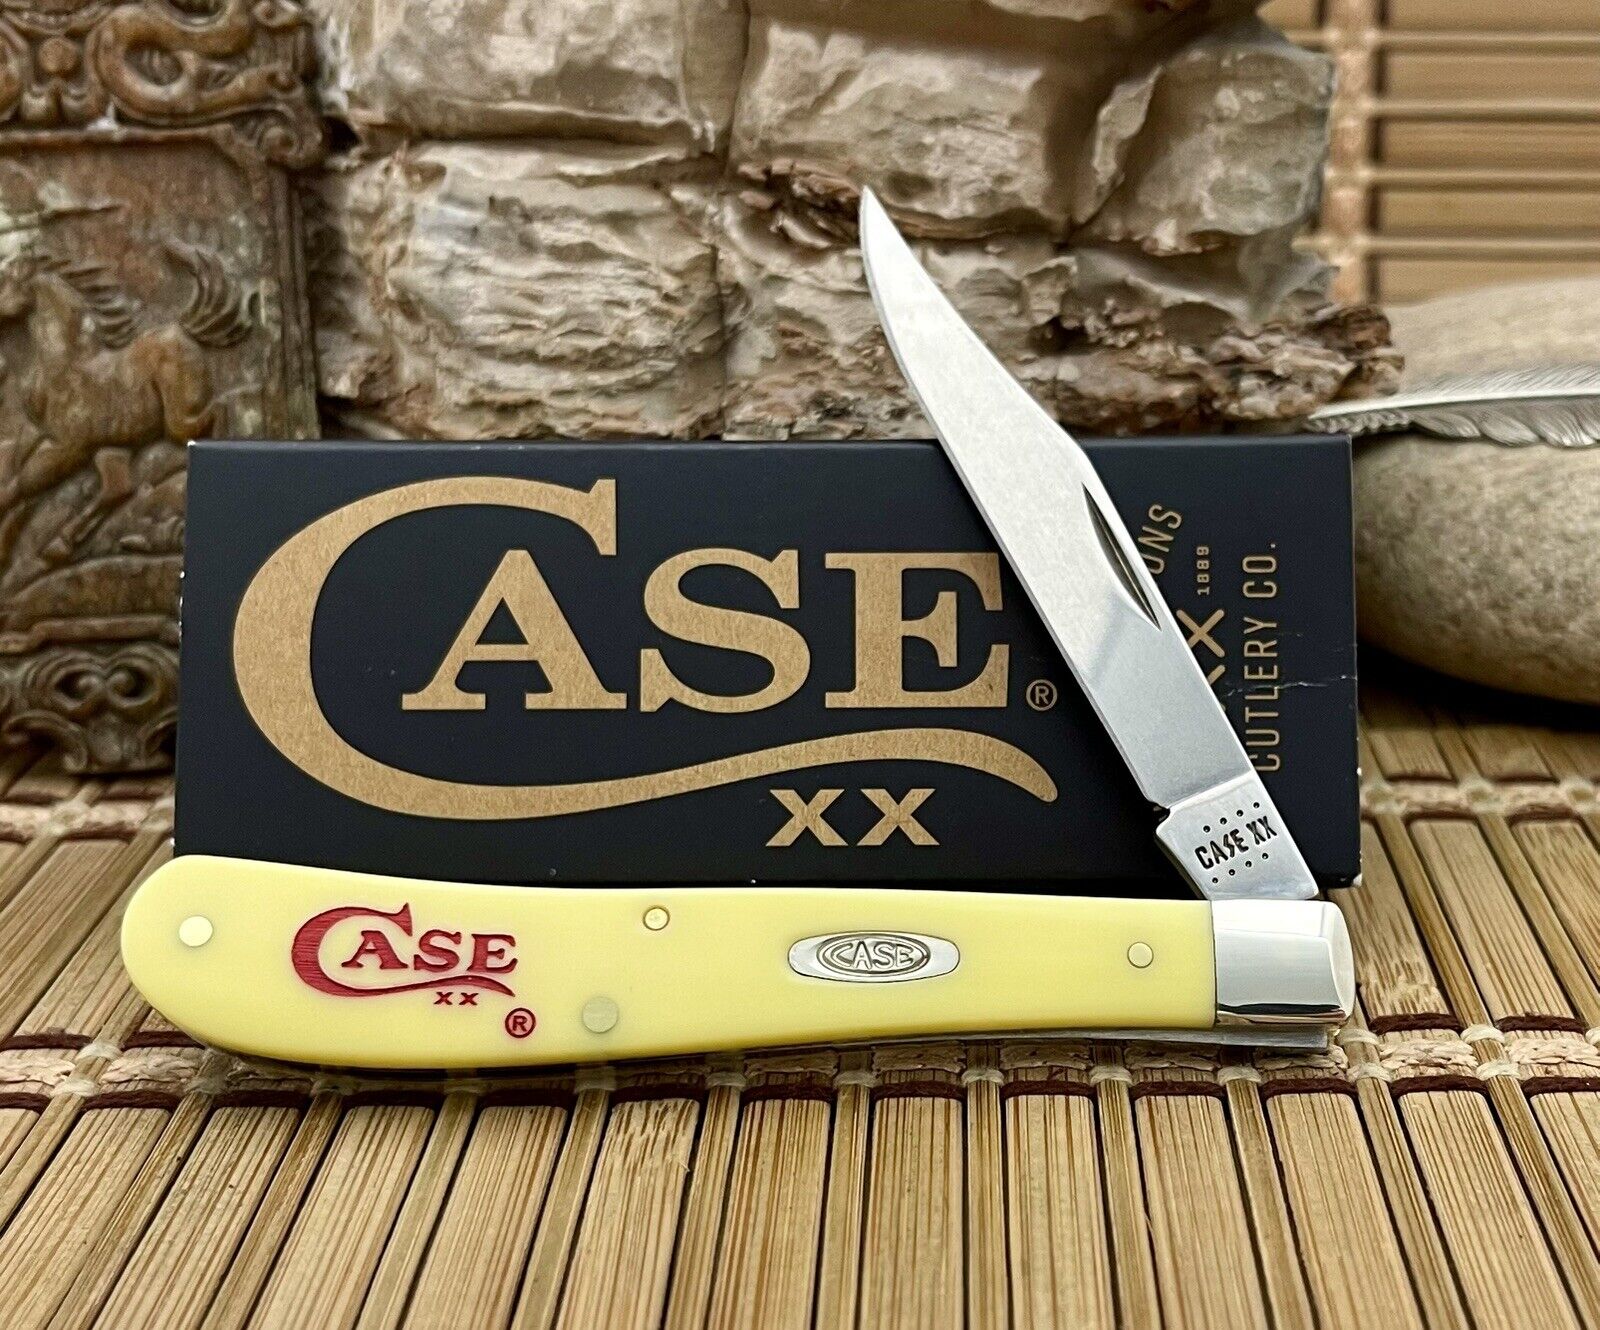 Case XX USA 2024 Red Edition Case LOGO Stainless Barehead Slimline Trapper Knife